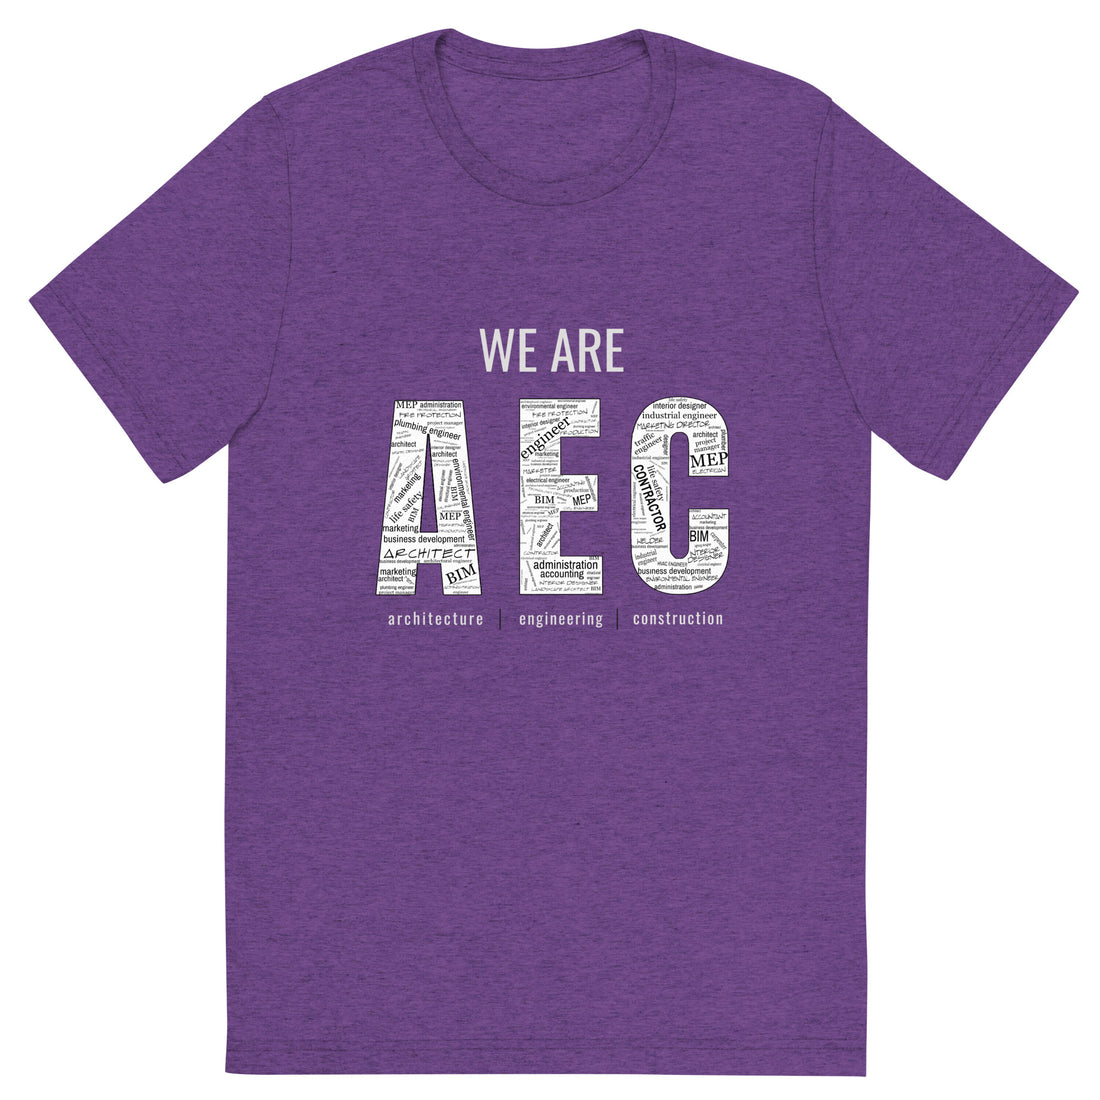 We are AEC | Wastewater Engineer Preview #2